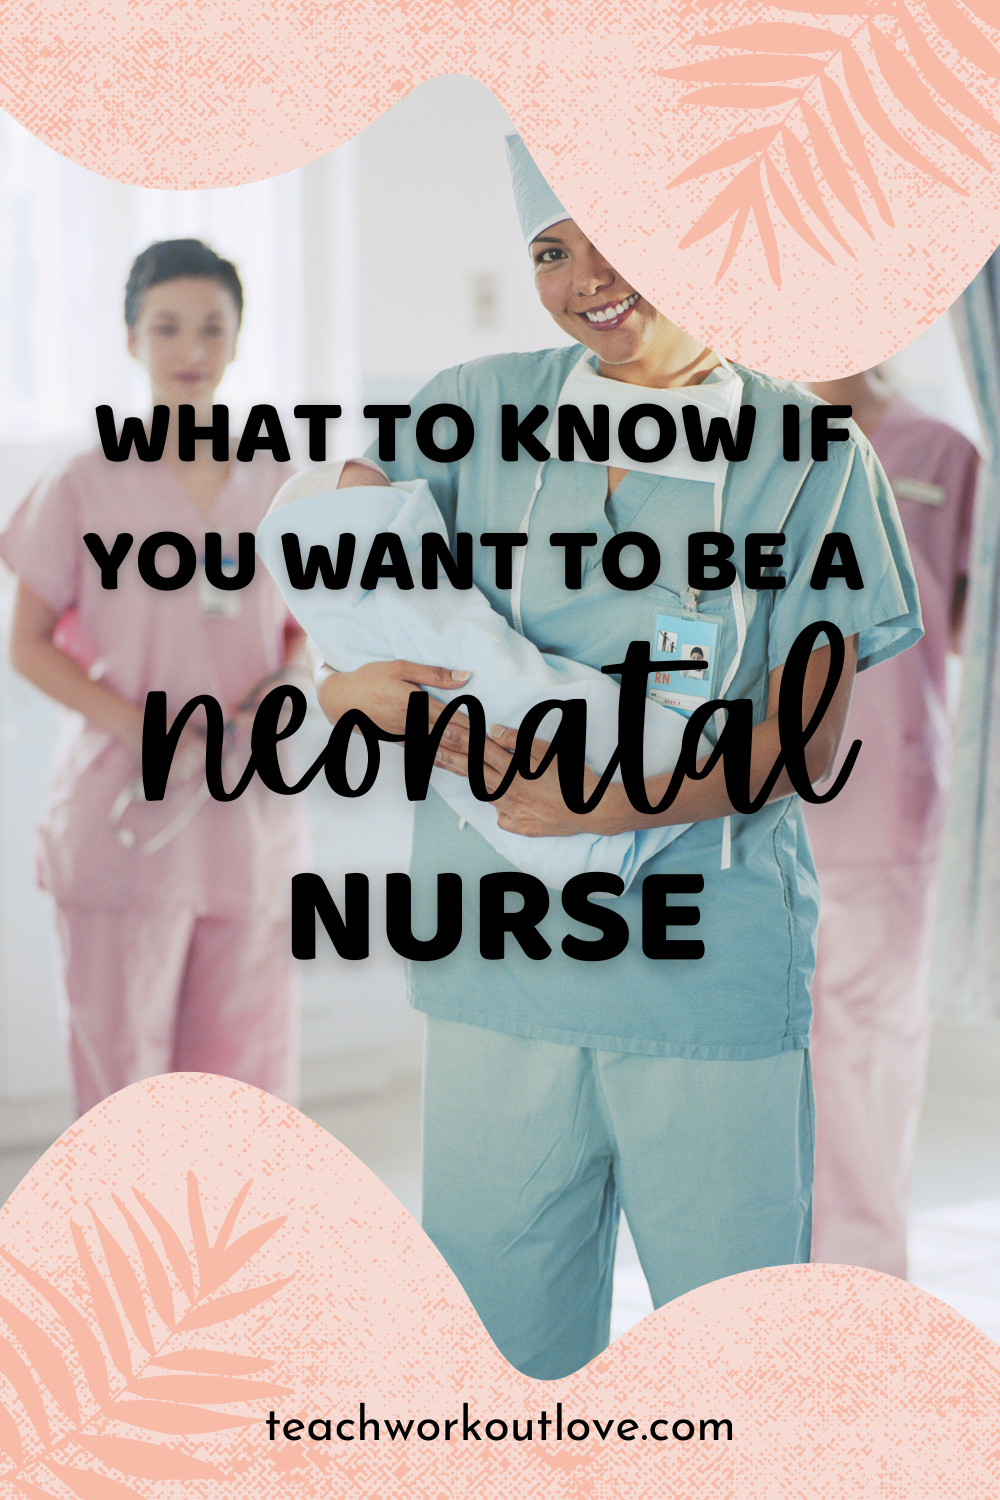 For any medical student or healthcare worker looking to explore this option, we have compiled a basic guide to being a neonatal nurse.